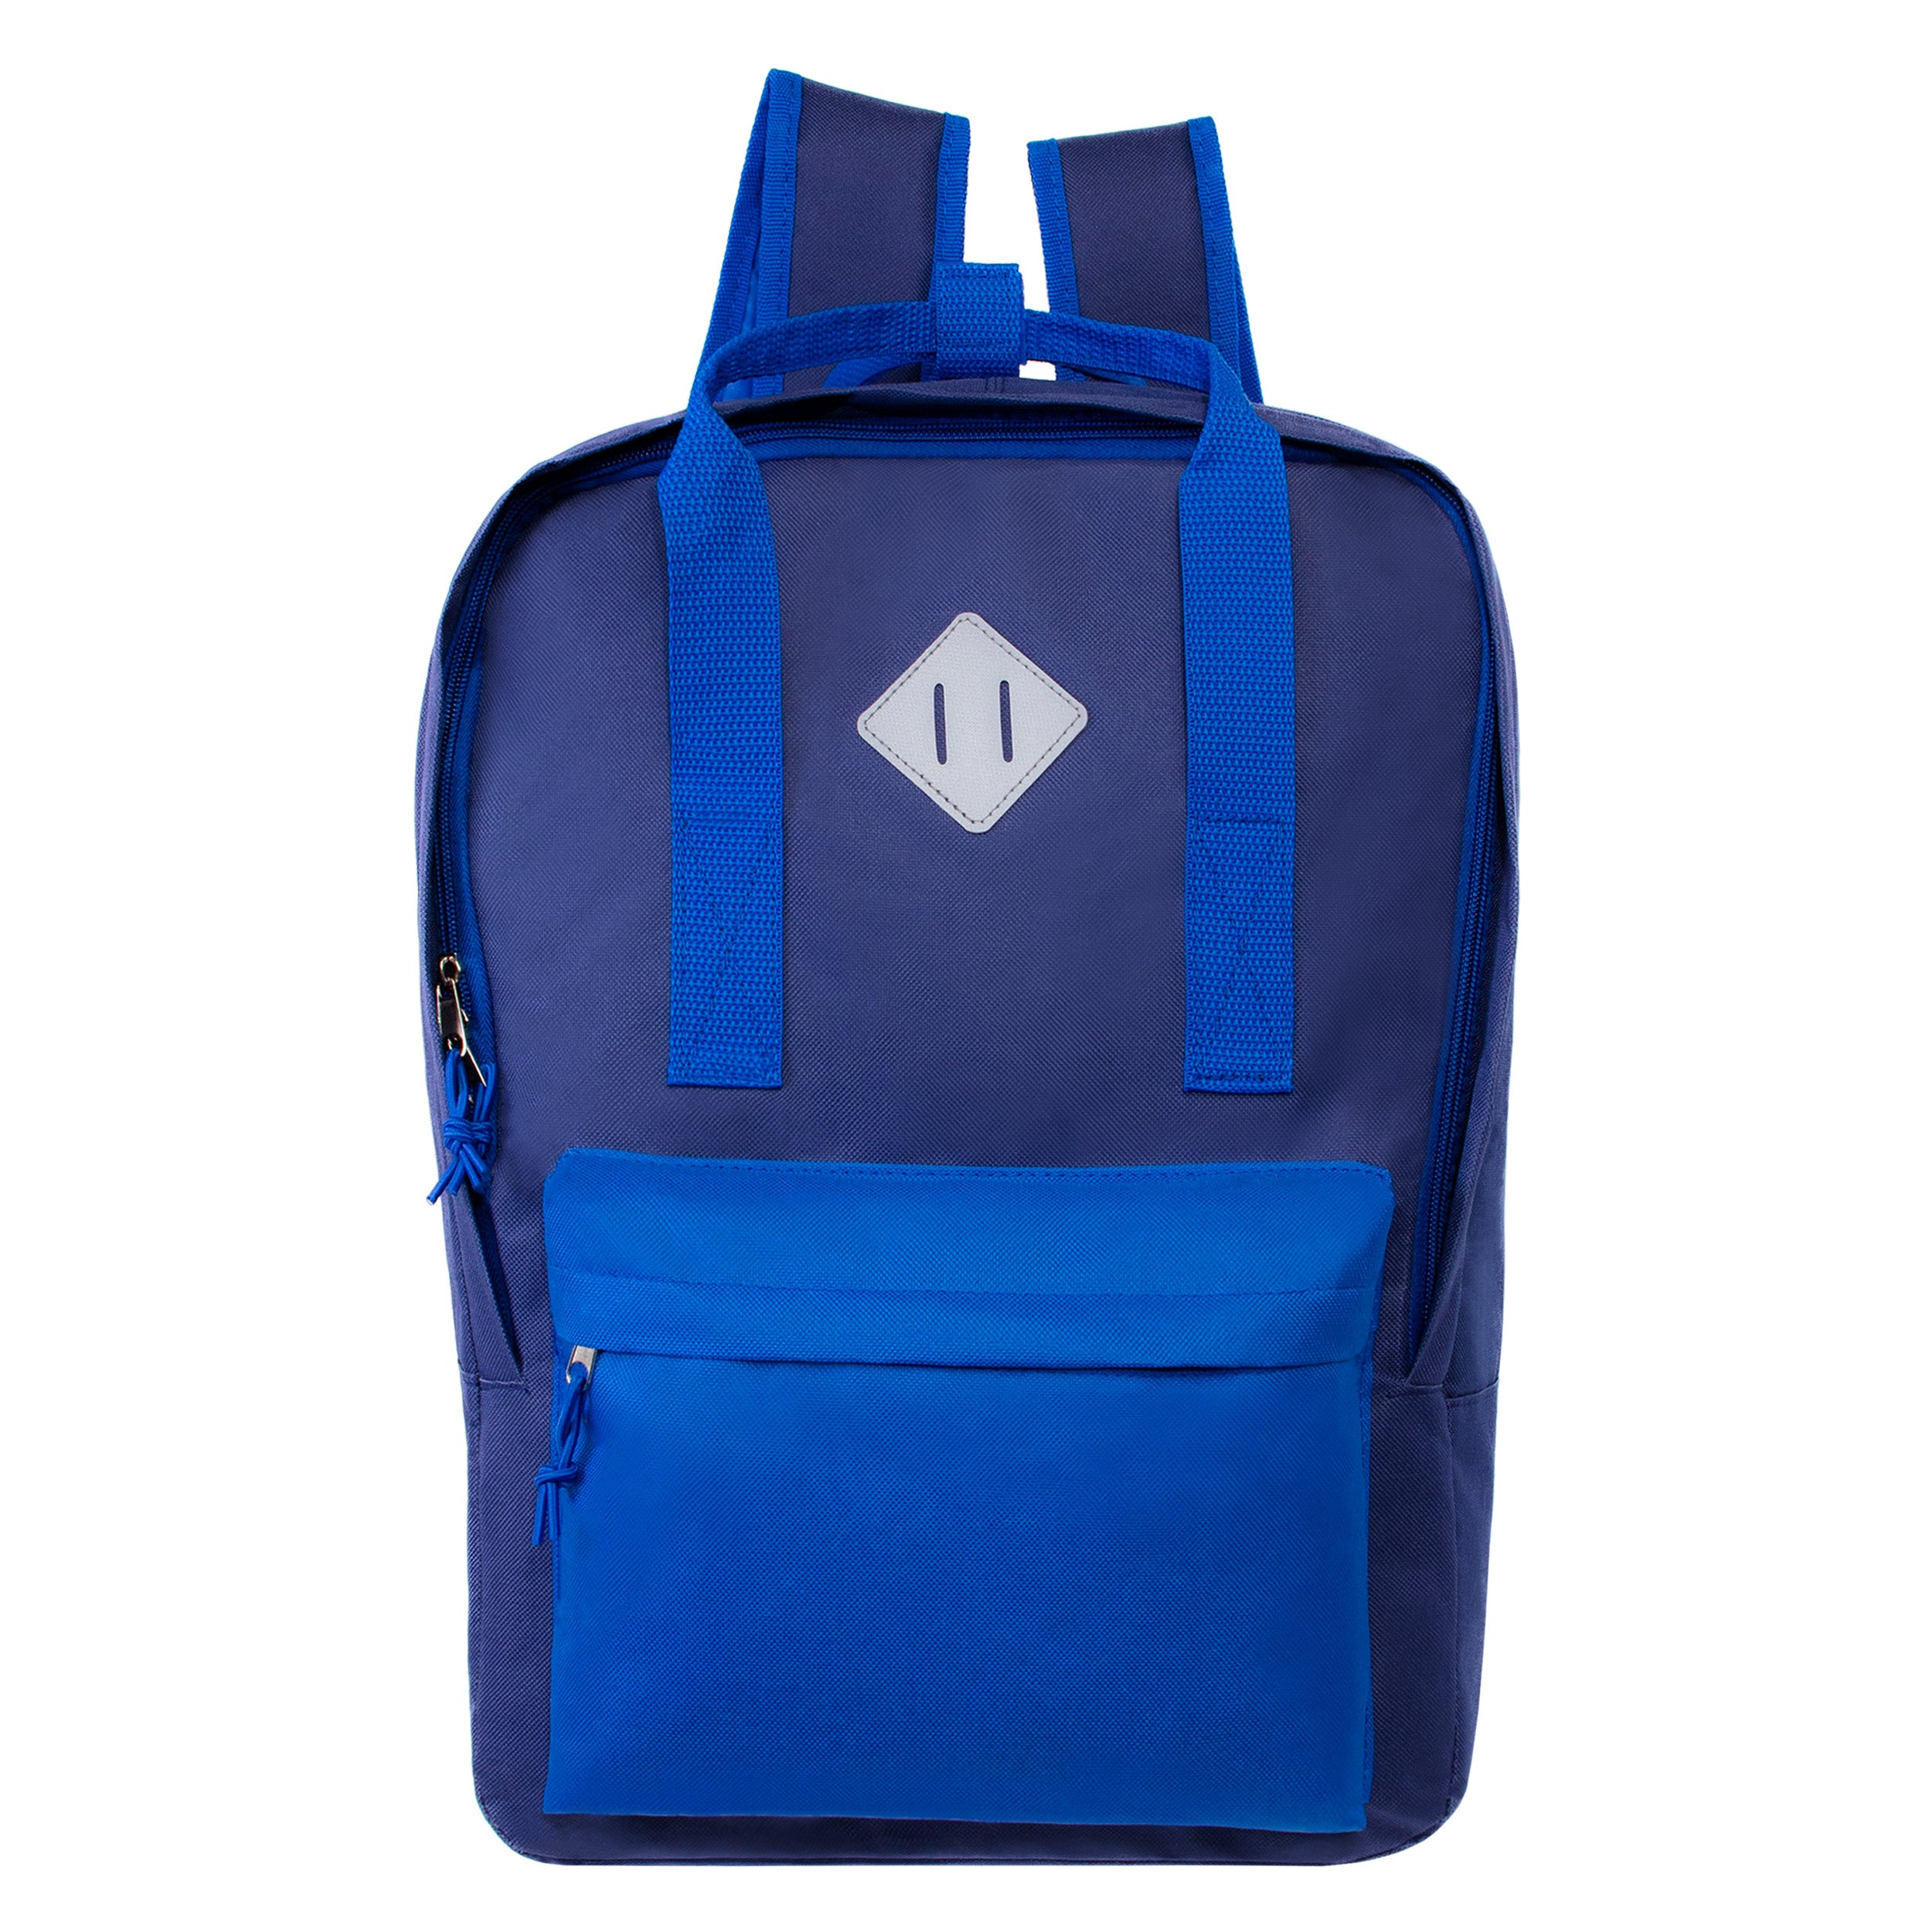 17" Wholesale Backpack with Handles in 5 Assorted Colors - Bulk Case of 24